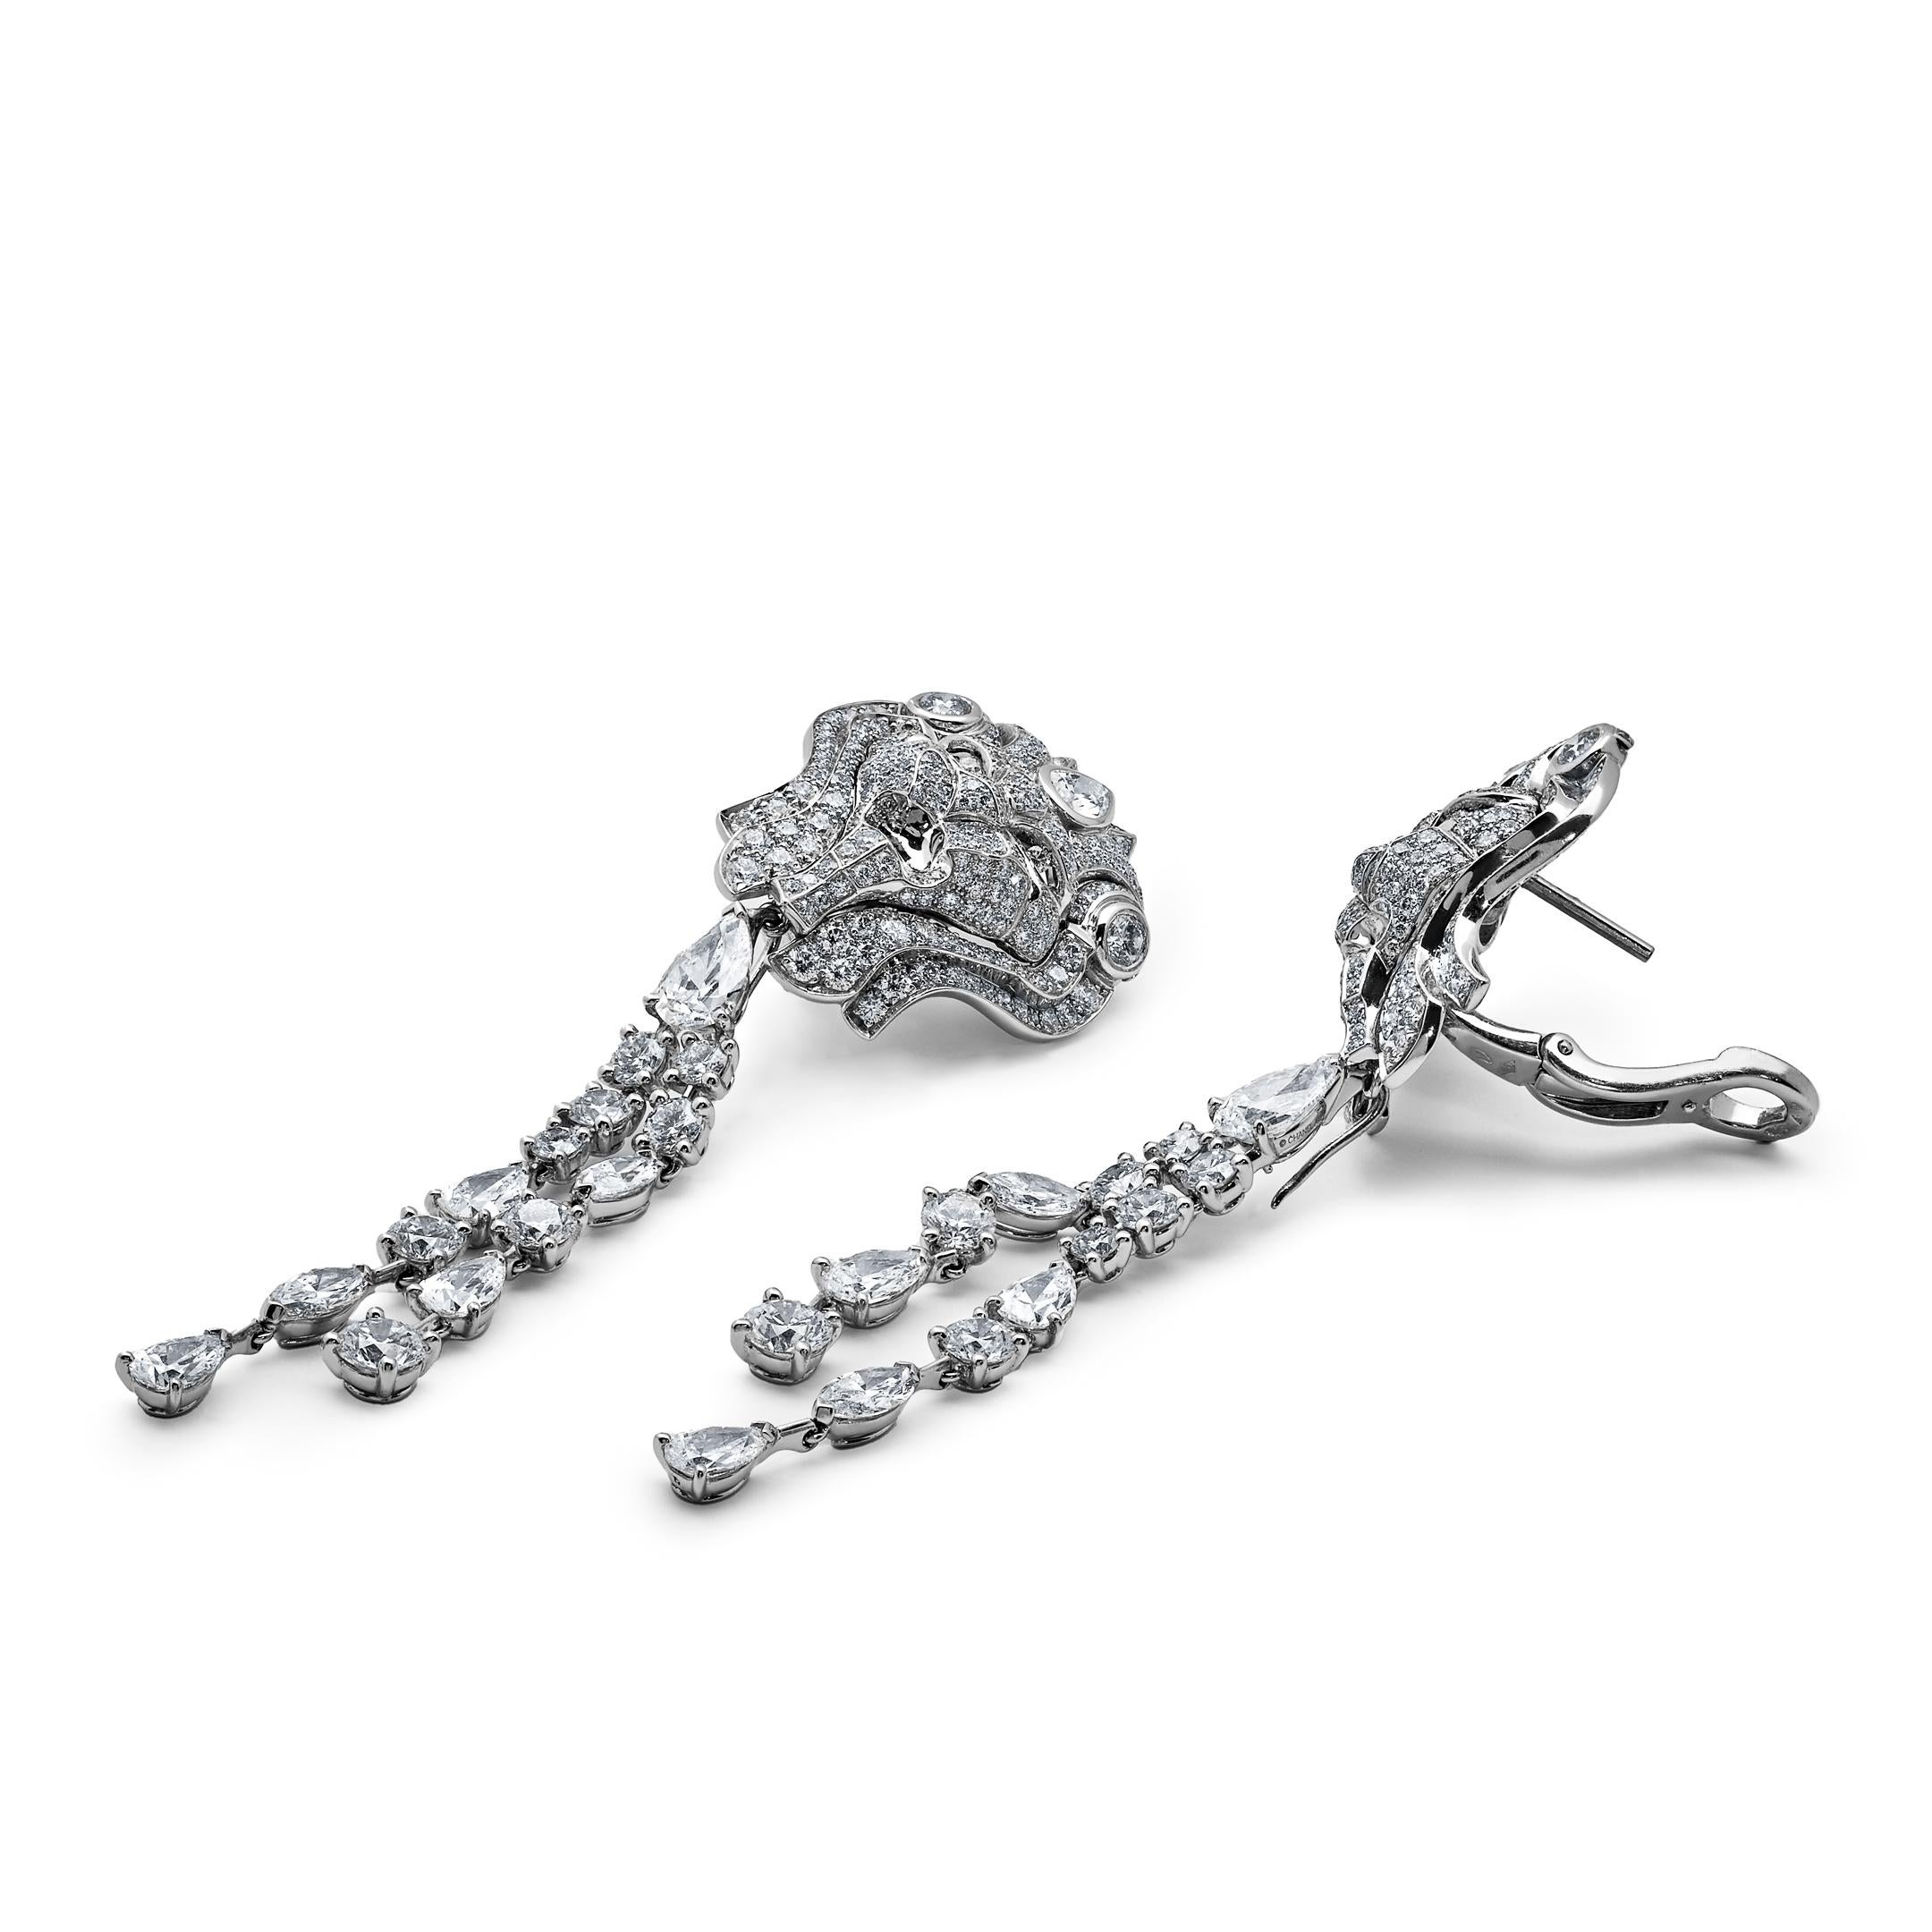 This Chanel Lion white gold diamond pair with total carat weight 12,3cts is a stunning piece from Sous Le Signe Du Lion HJ collection. From Paris to Venice, the lion has long been an integral part of the house of CHANEL. This is a transformable